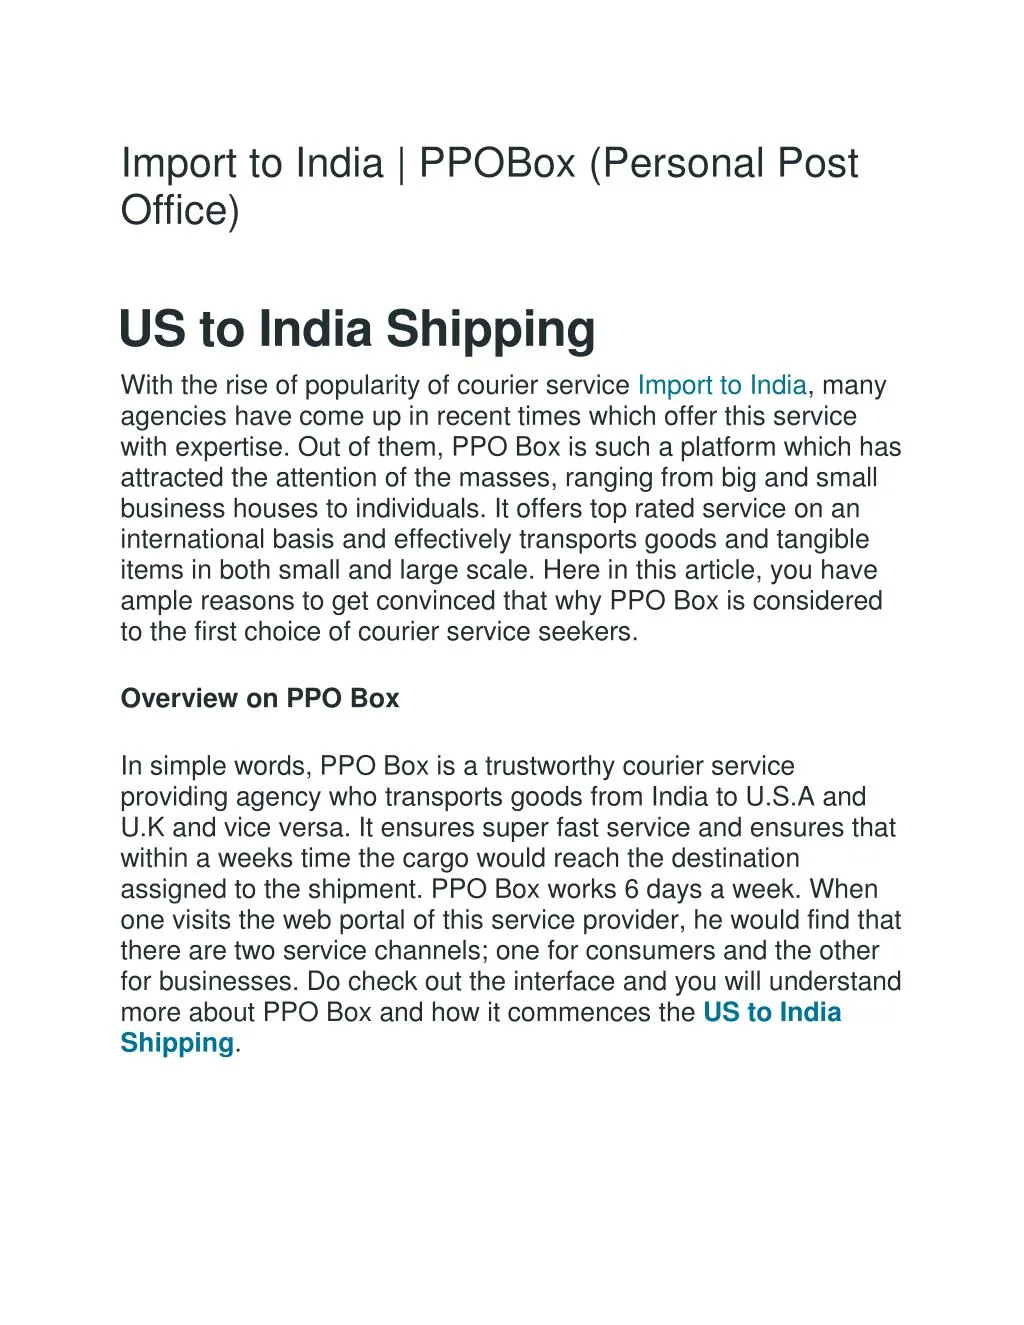 import to india ppobox personal post office